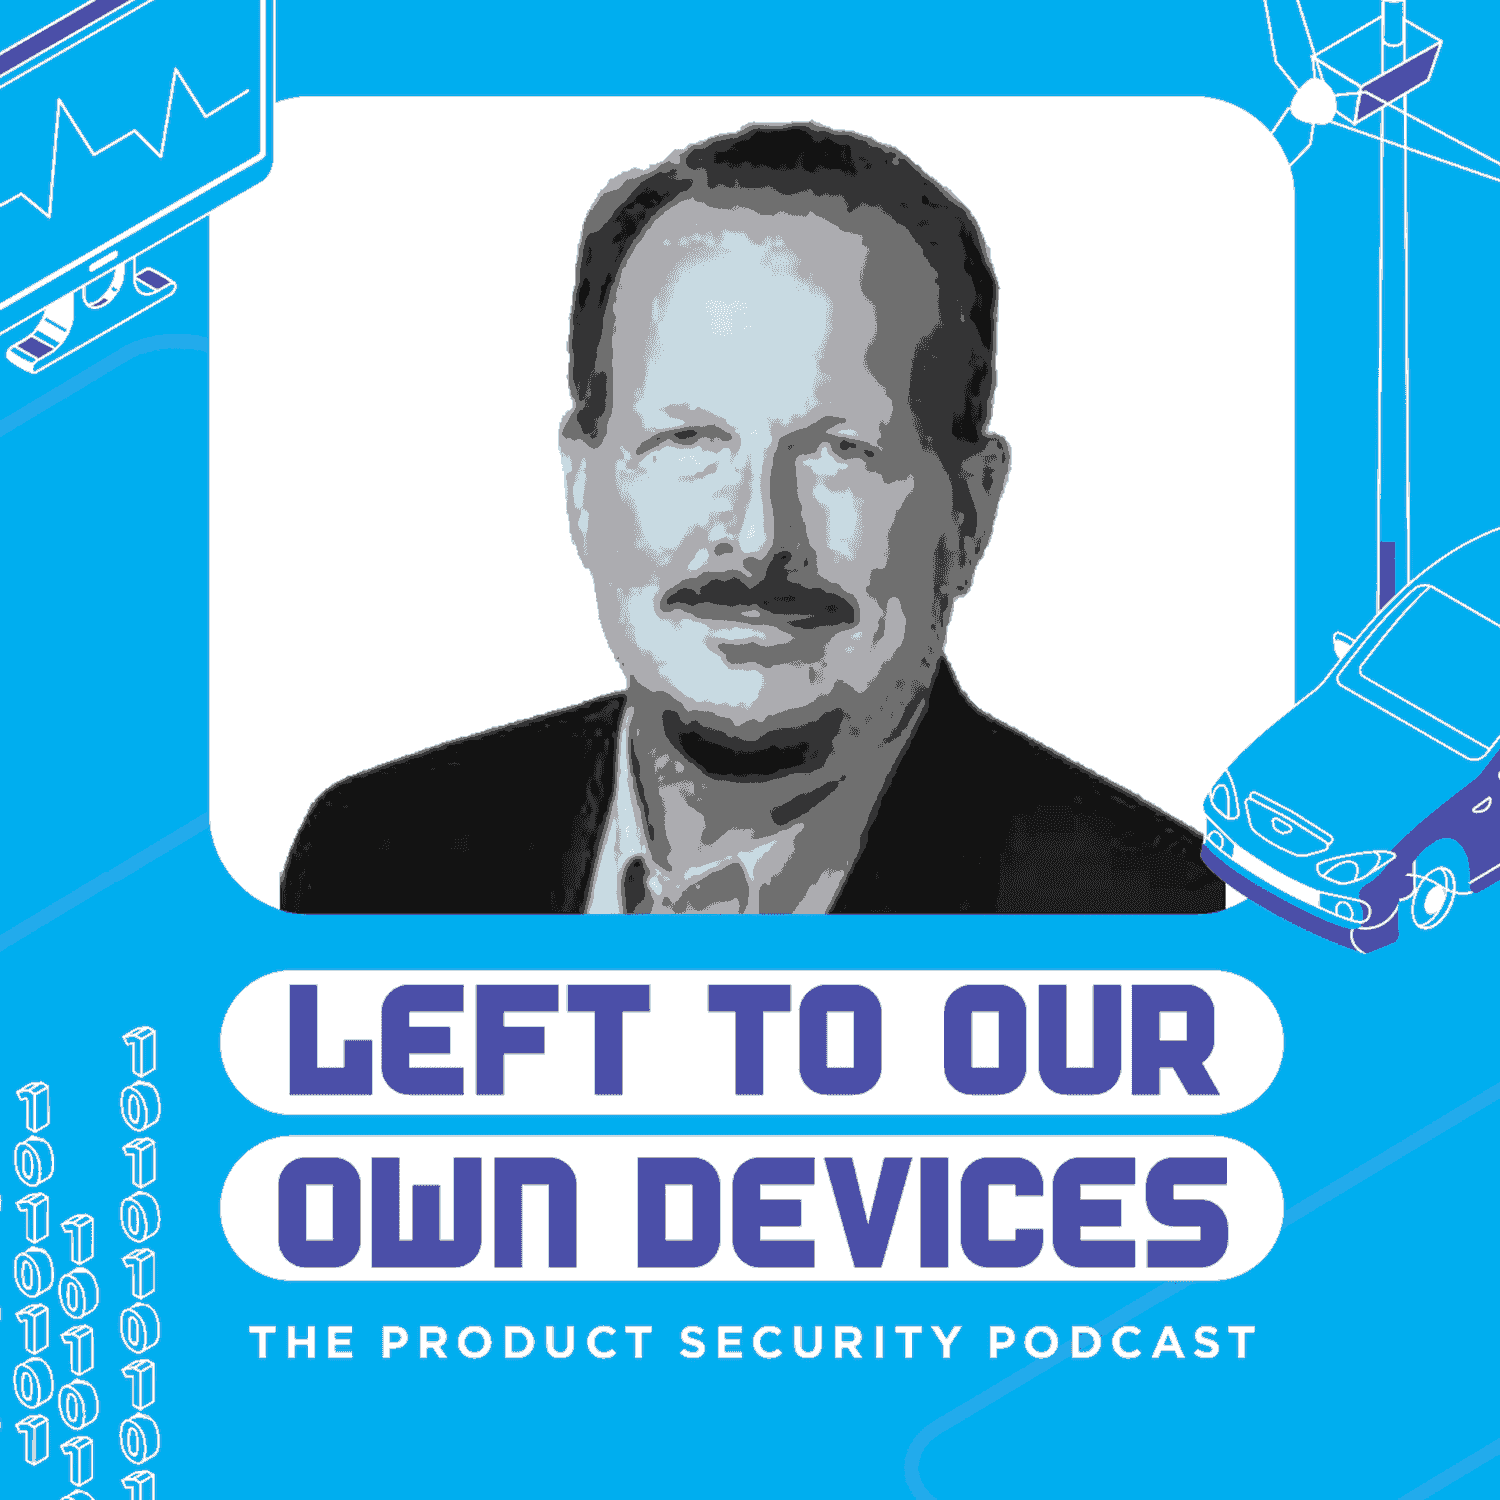 Chris Gates: Protecting Lives with Medical Device Cybersecurity- Part 2